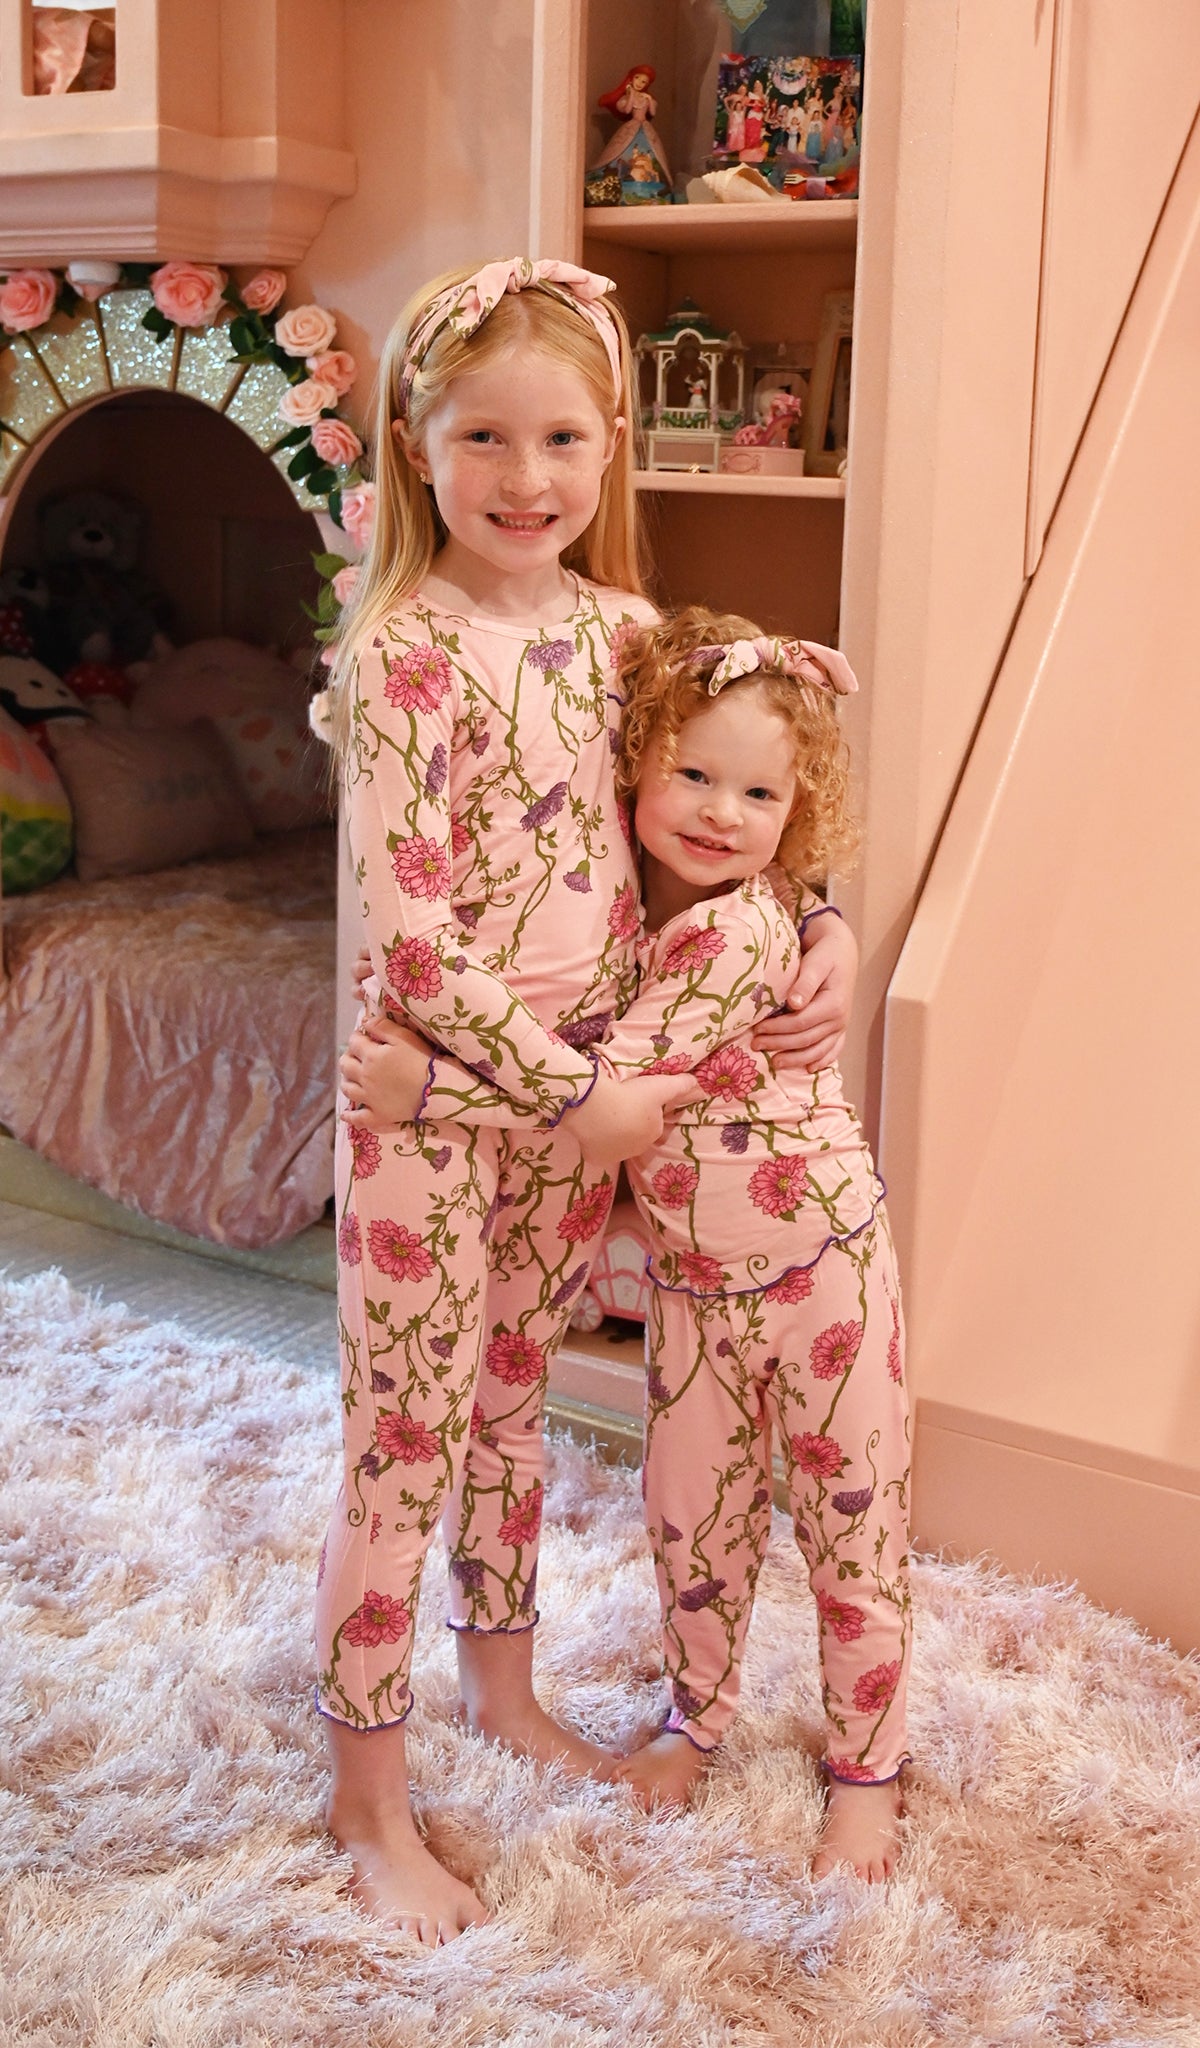 Dahlia Charlie Baby 3-Piece Pant PJ worn by baby girl hugging her big sister, who is also wearing the same PJ.